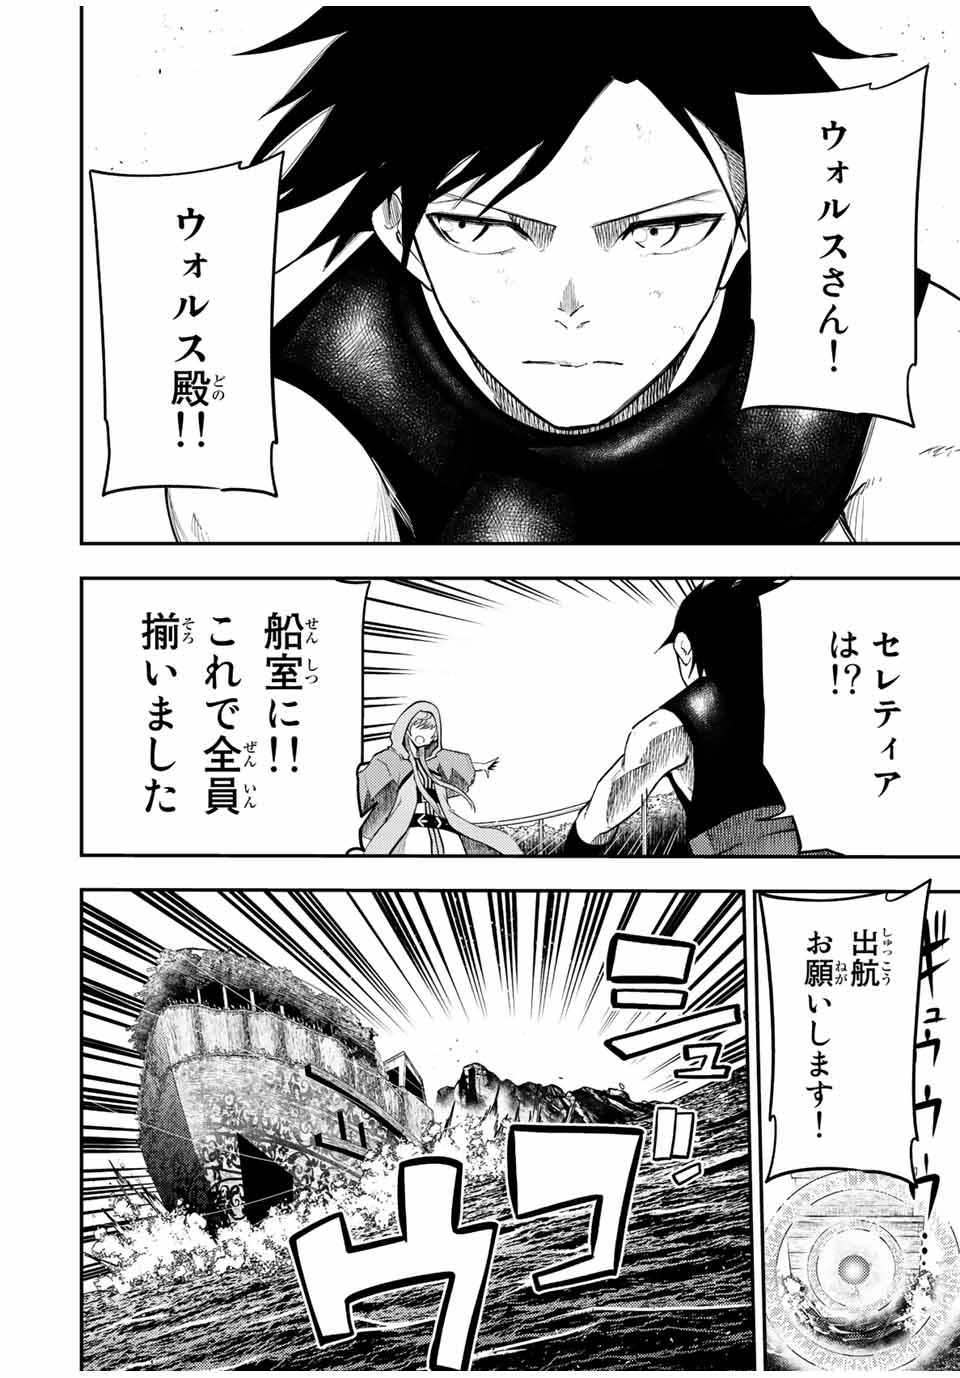 the strongest former prince-; 奴隷転生 ～その奴隷、最強の元王子につき～ 第65話 - Page 10